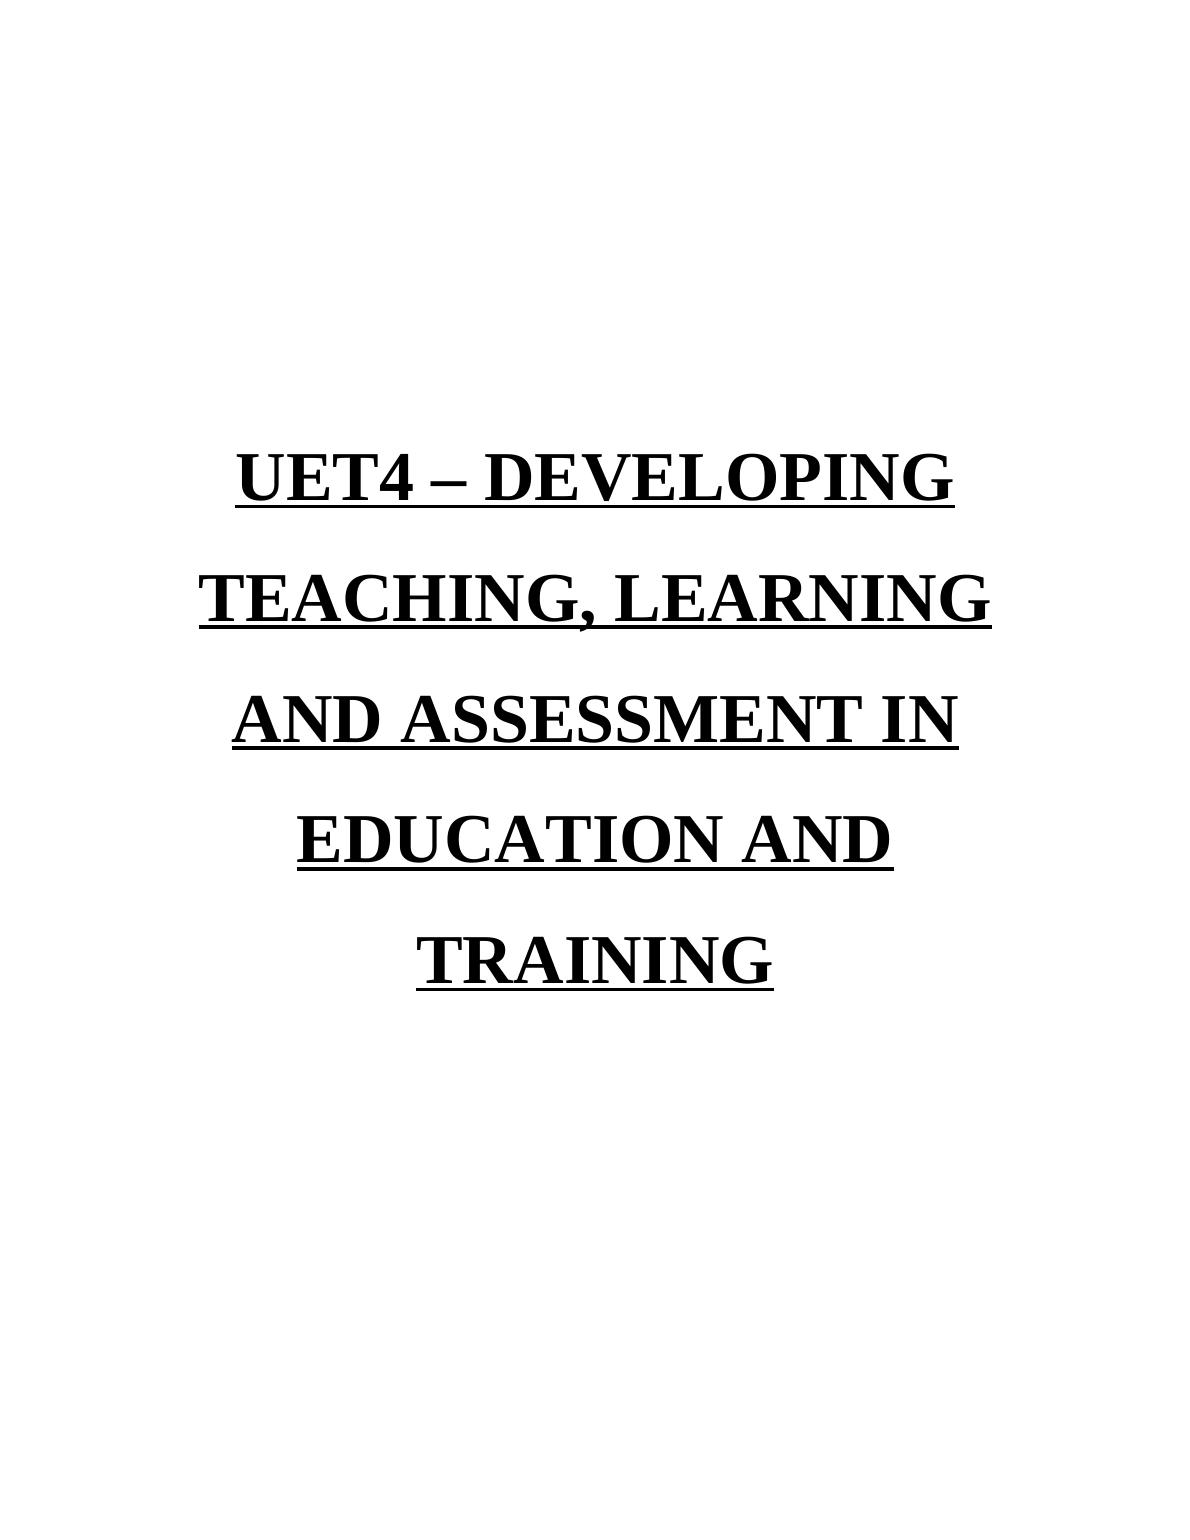 UET4 – Developing, Teaching, Learning and Assessment in Education and Training_1